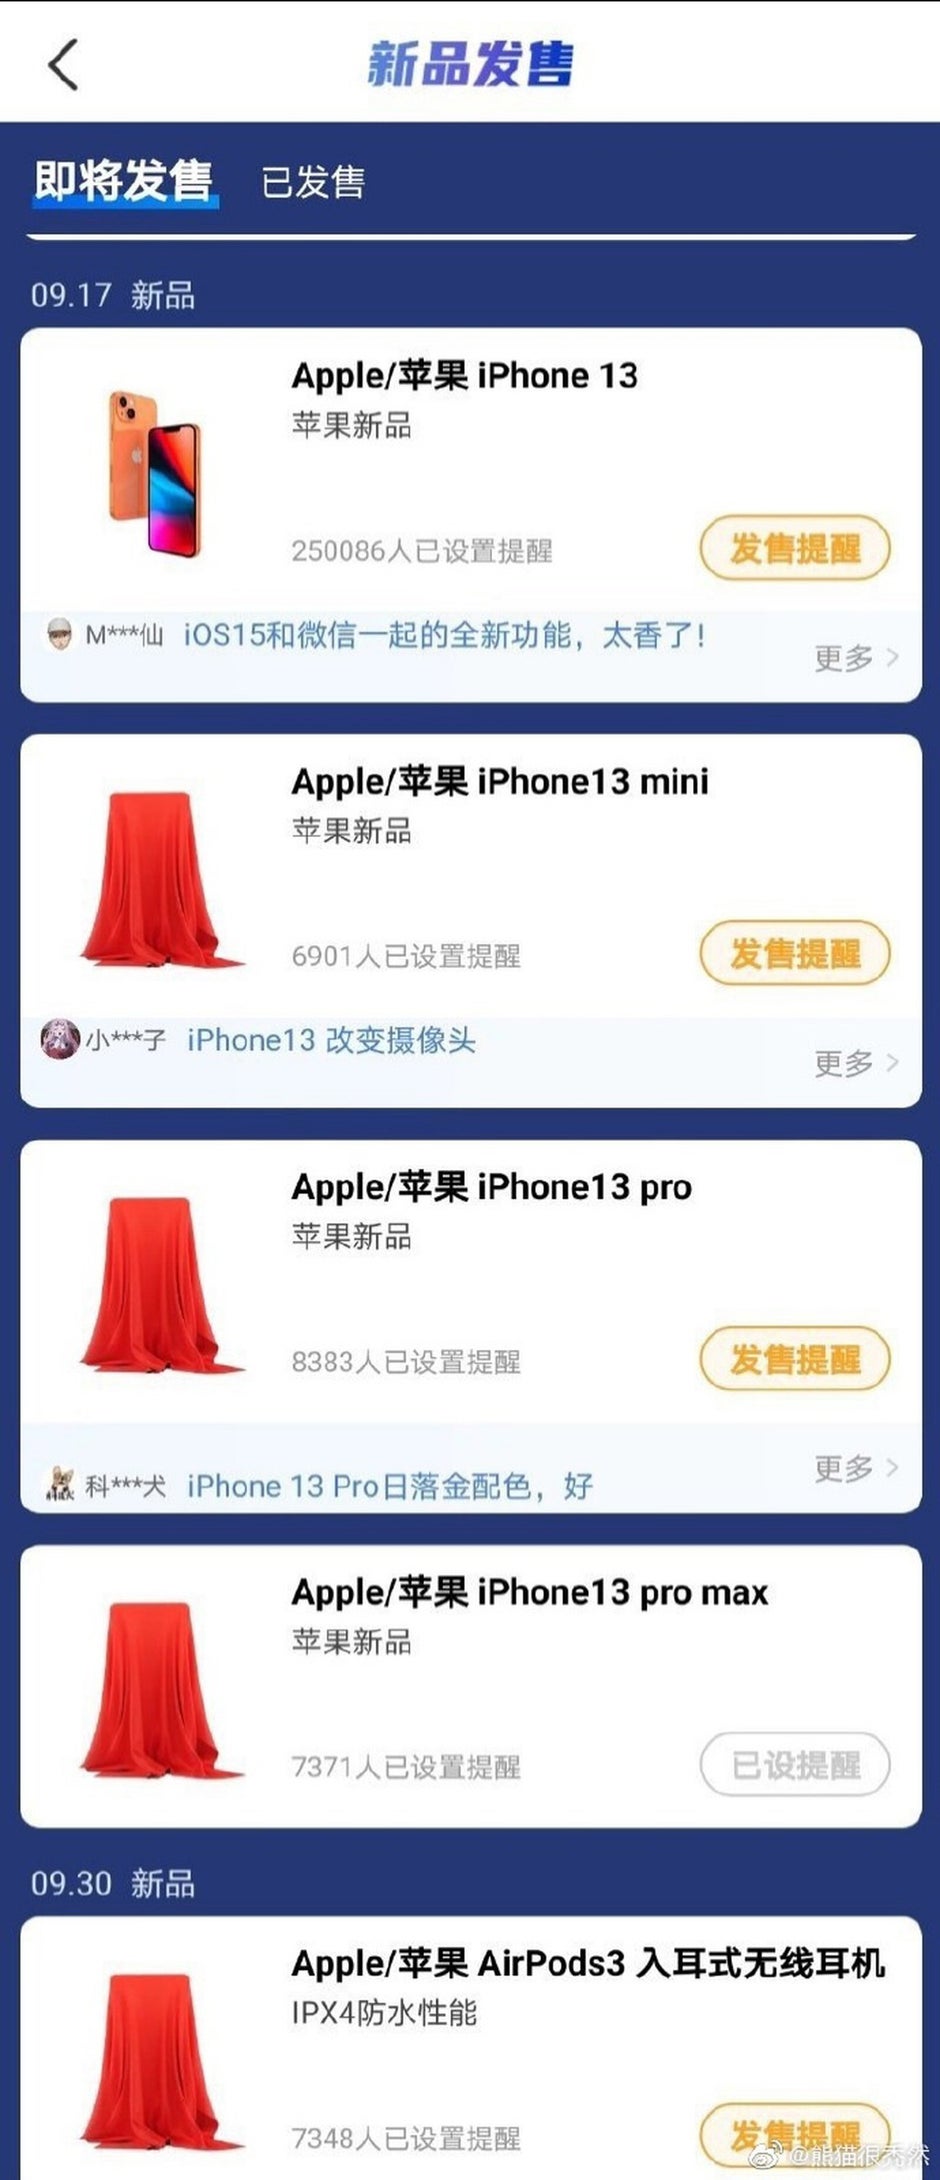 Possible iPhone 13/Pro 5G and AirPods 3 release dates leak